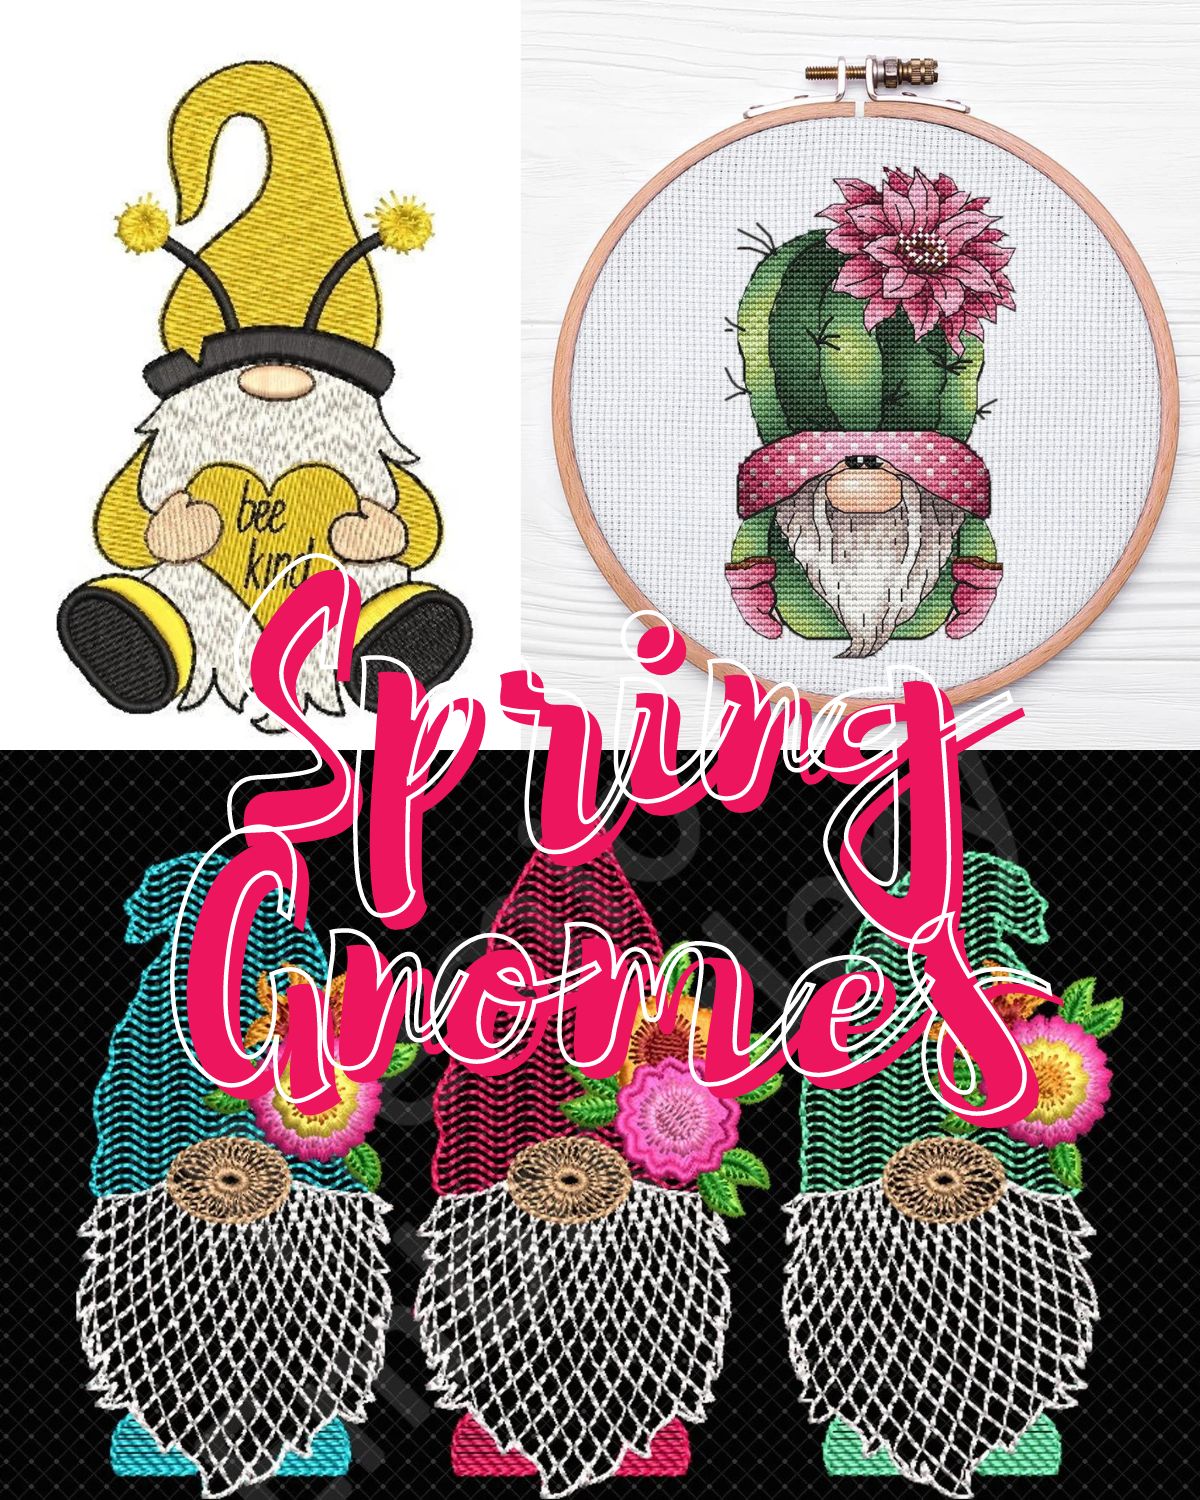 Gnomes with spring themes